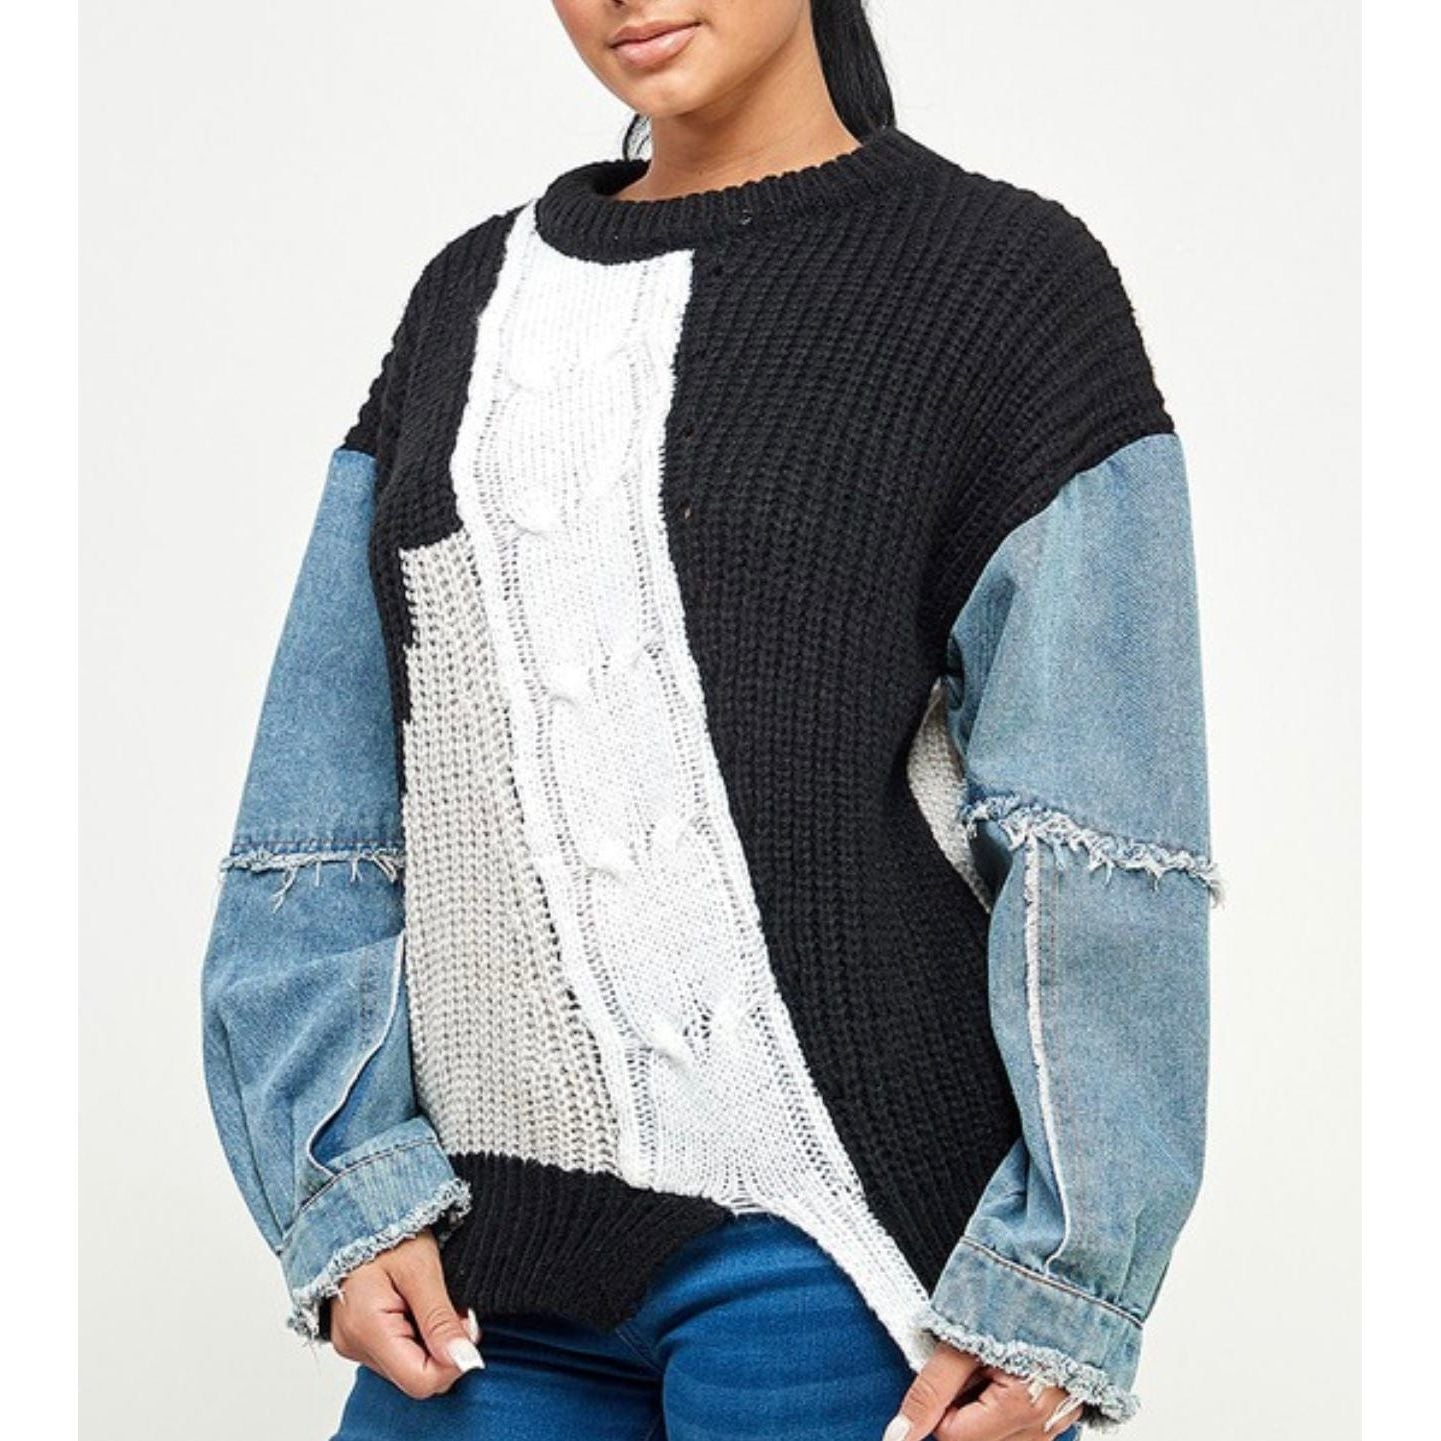 One Size (PREORDER-Ships 11/30) Black Andell Knit Sweater